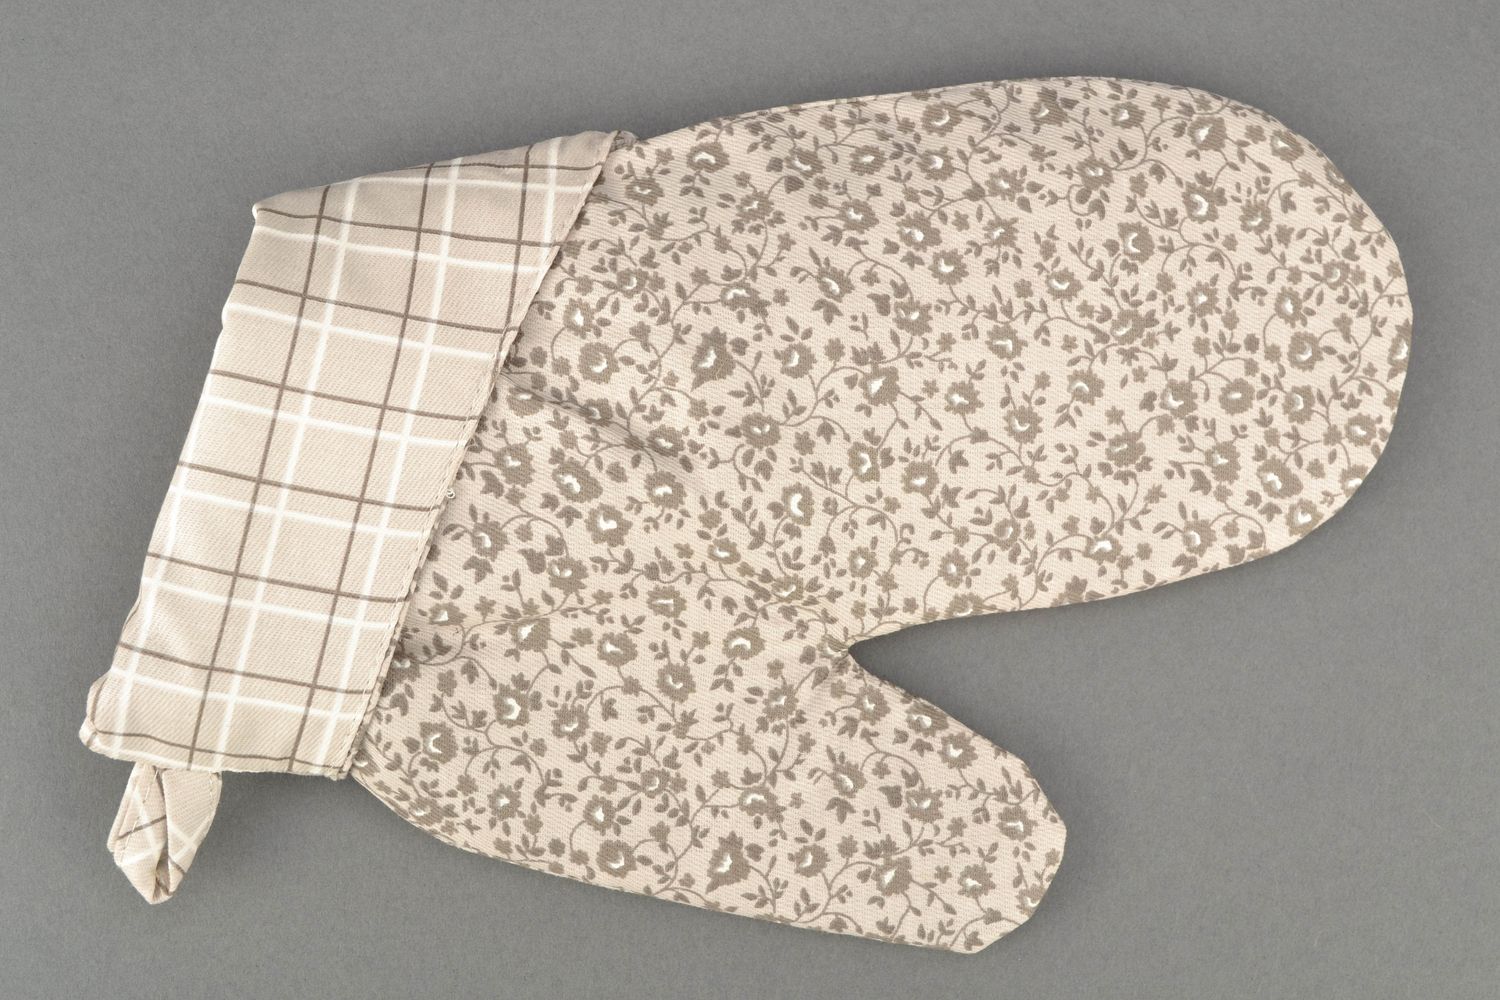 Oven mitt for hot dishes and home decor photo 3